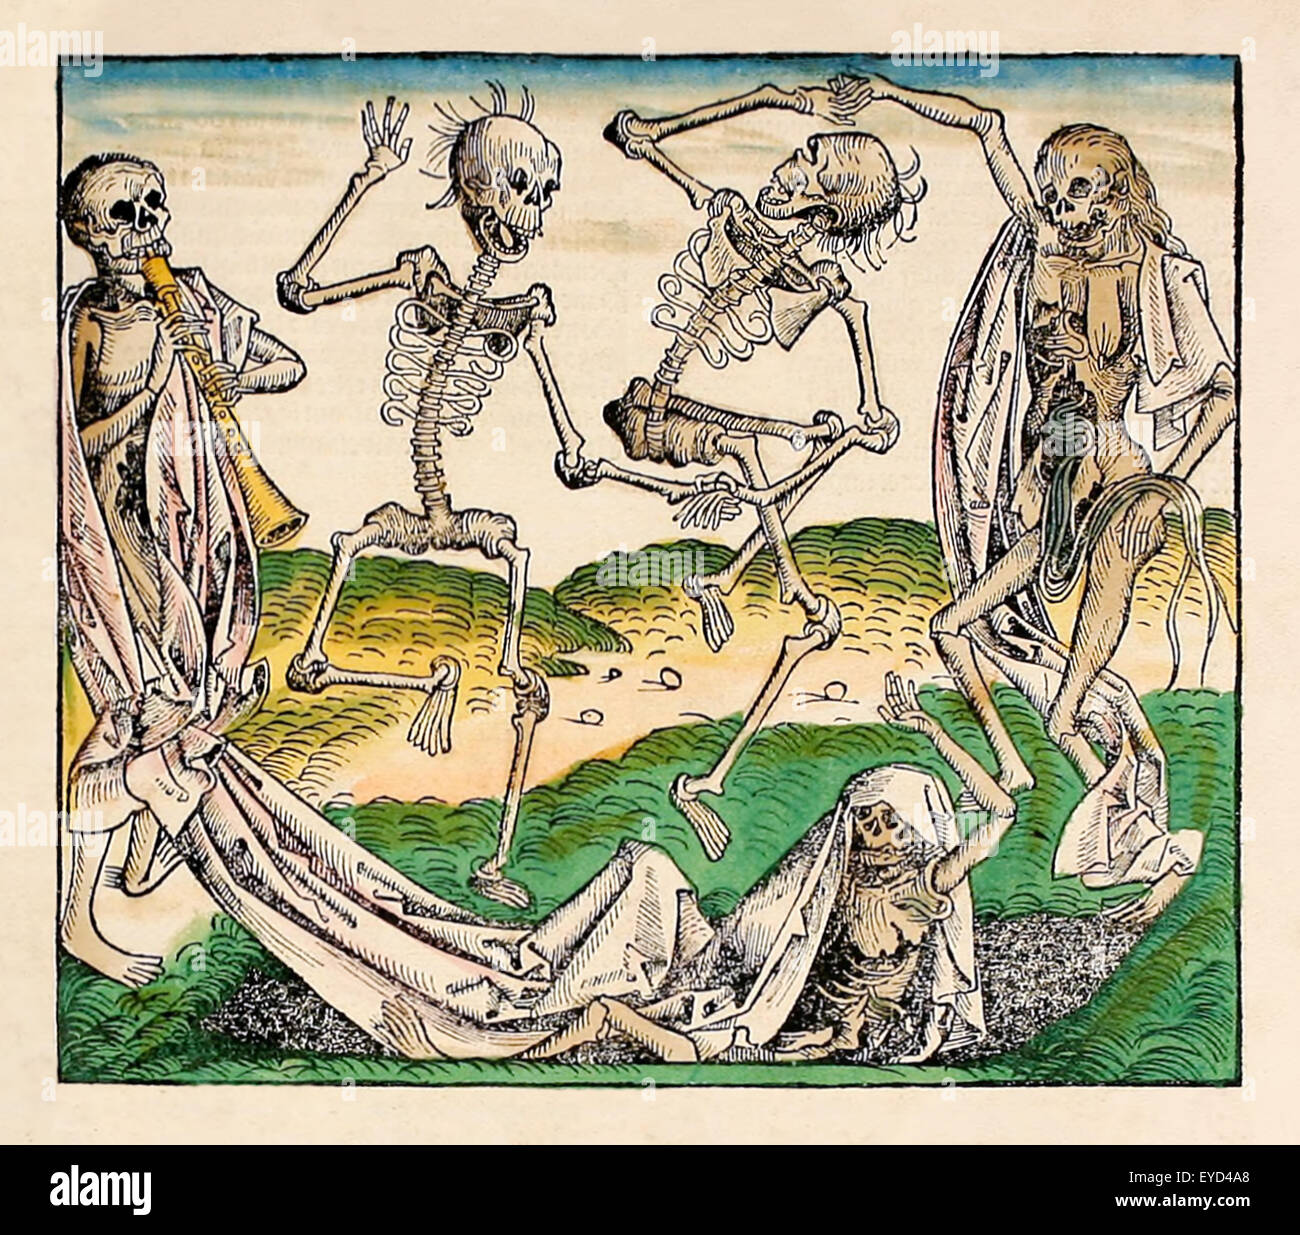 'Dance of Death' (aka 'Danse Macabre') from 'Liber Chronicarum' by Hartmann Schedel (1440-1514) published in 1493. See description for more information. Stock Photo